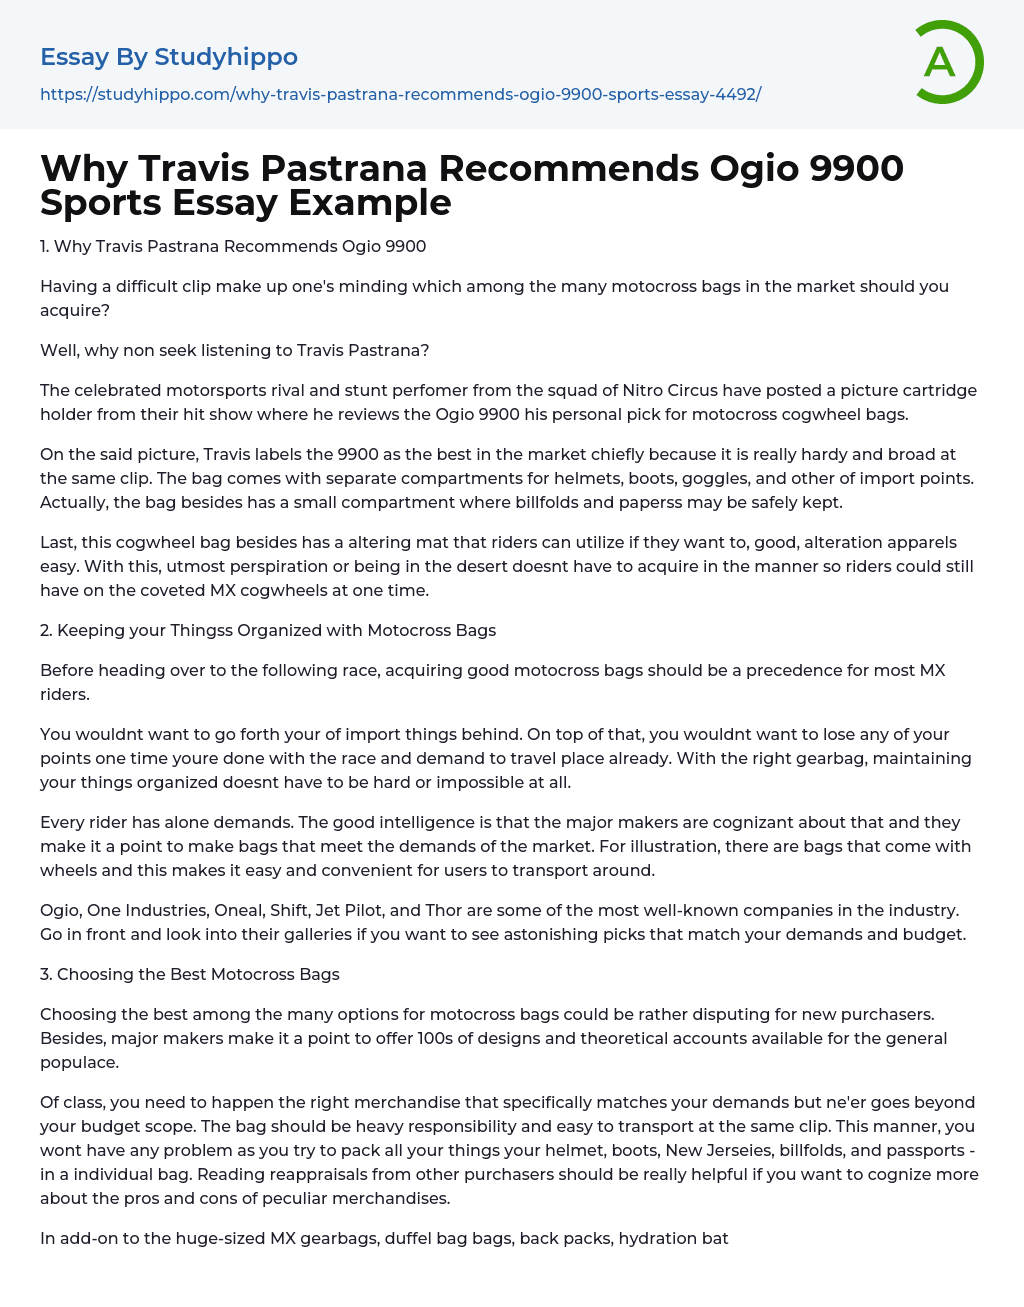 Why Travis Pastrana Recommends Ogio 9900 Sports Essay Example